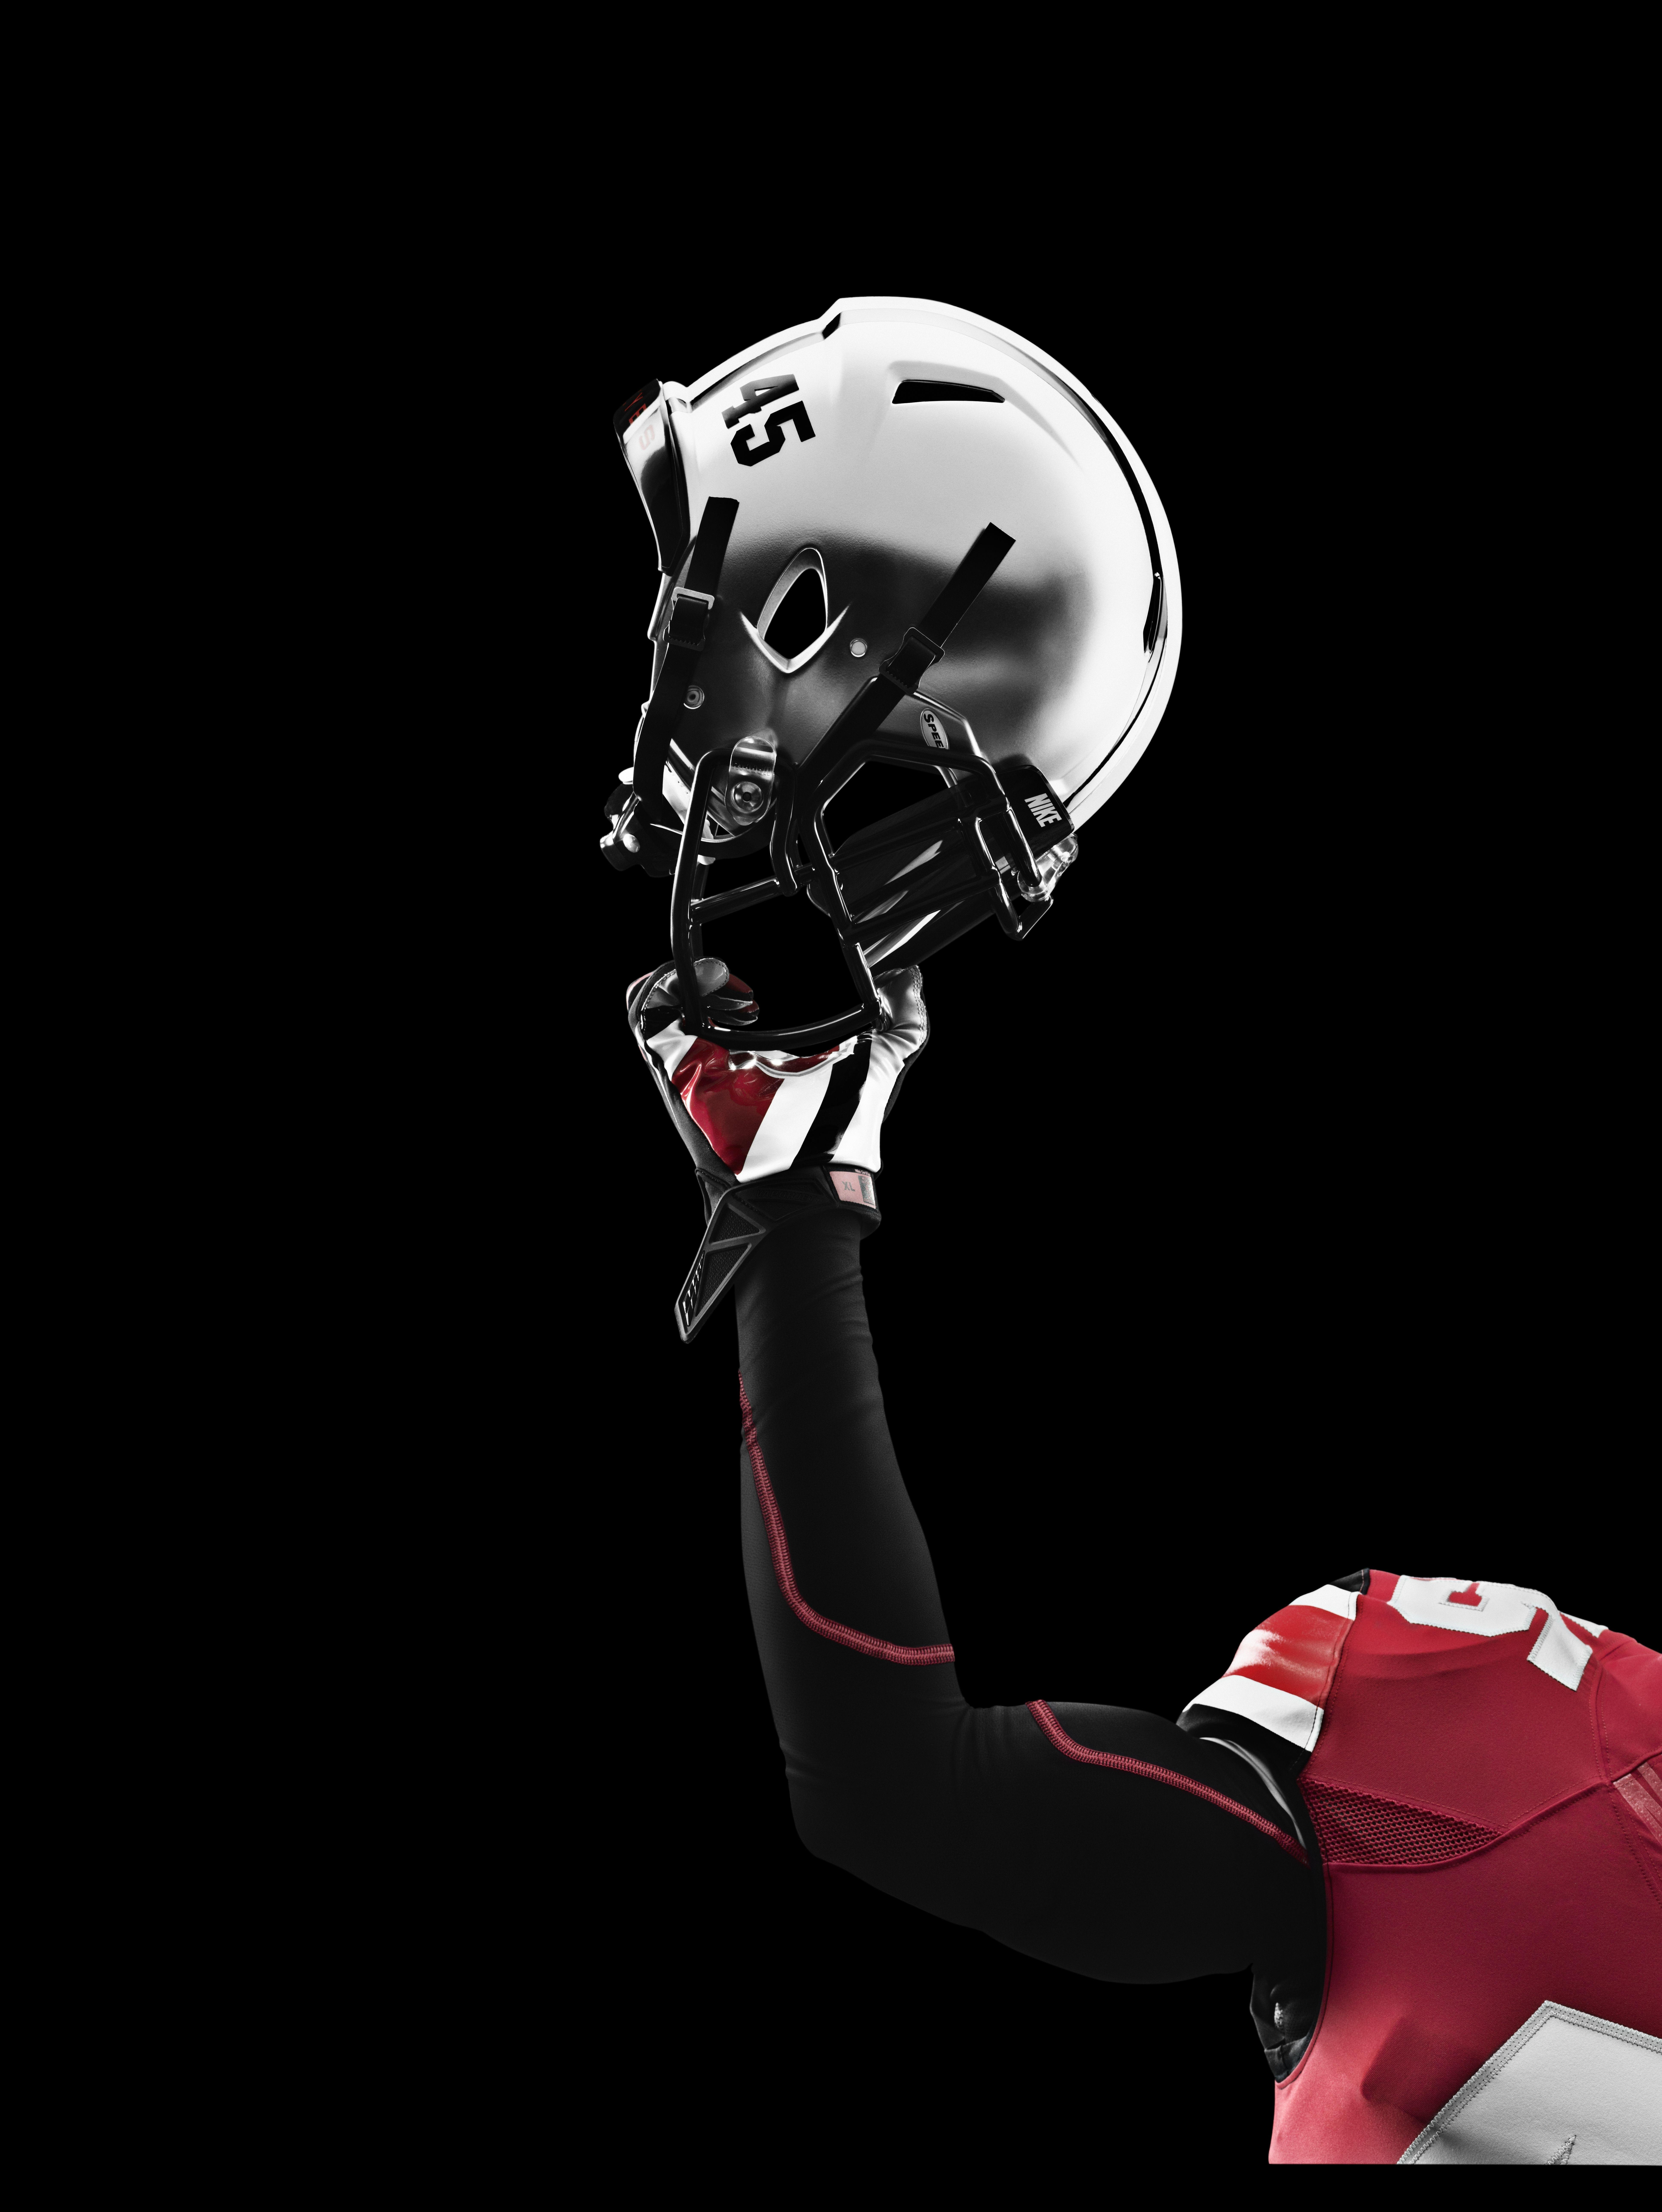 Ohio State uniforms deliver innovation while honoring the past